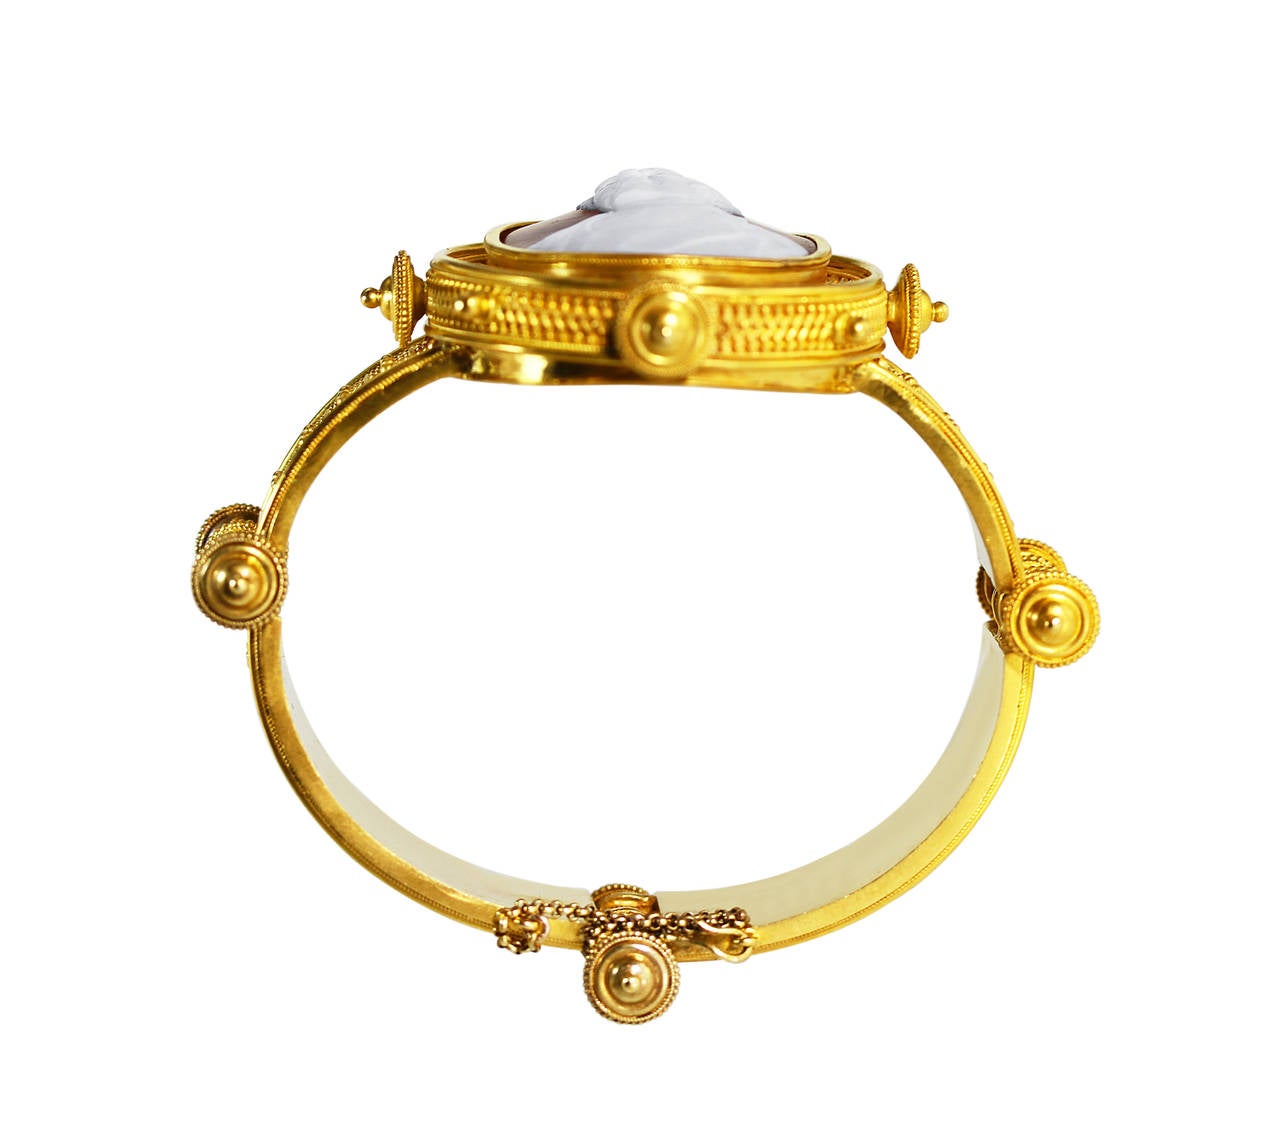 Women's Archaeological Revival Gold and Shell Cameo Bangle Bracelet